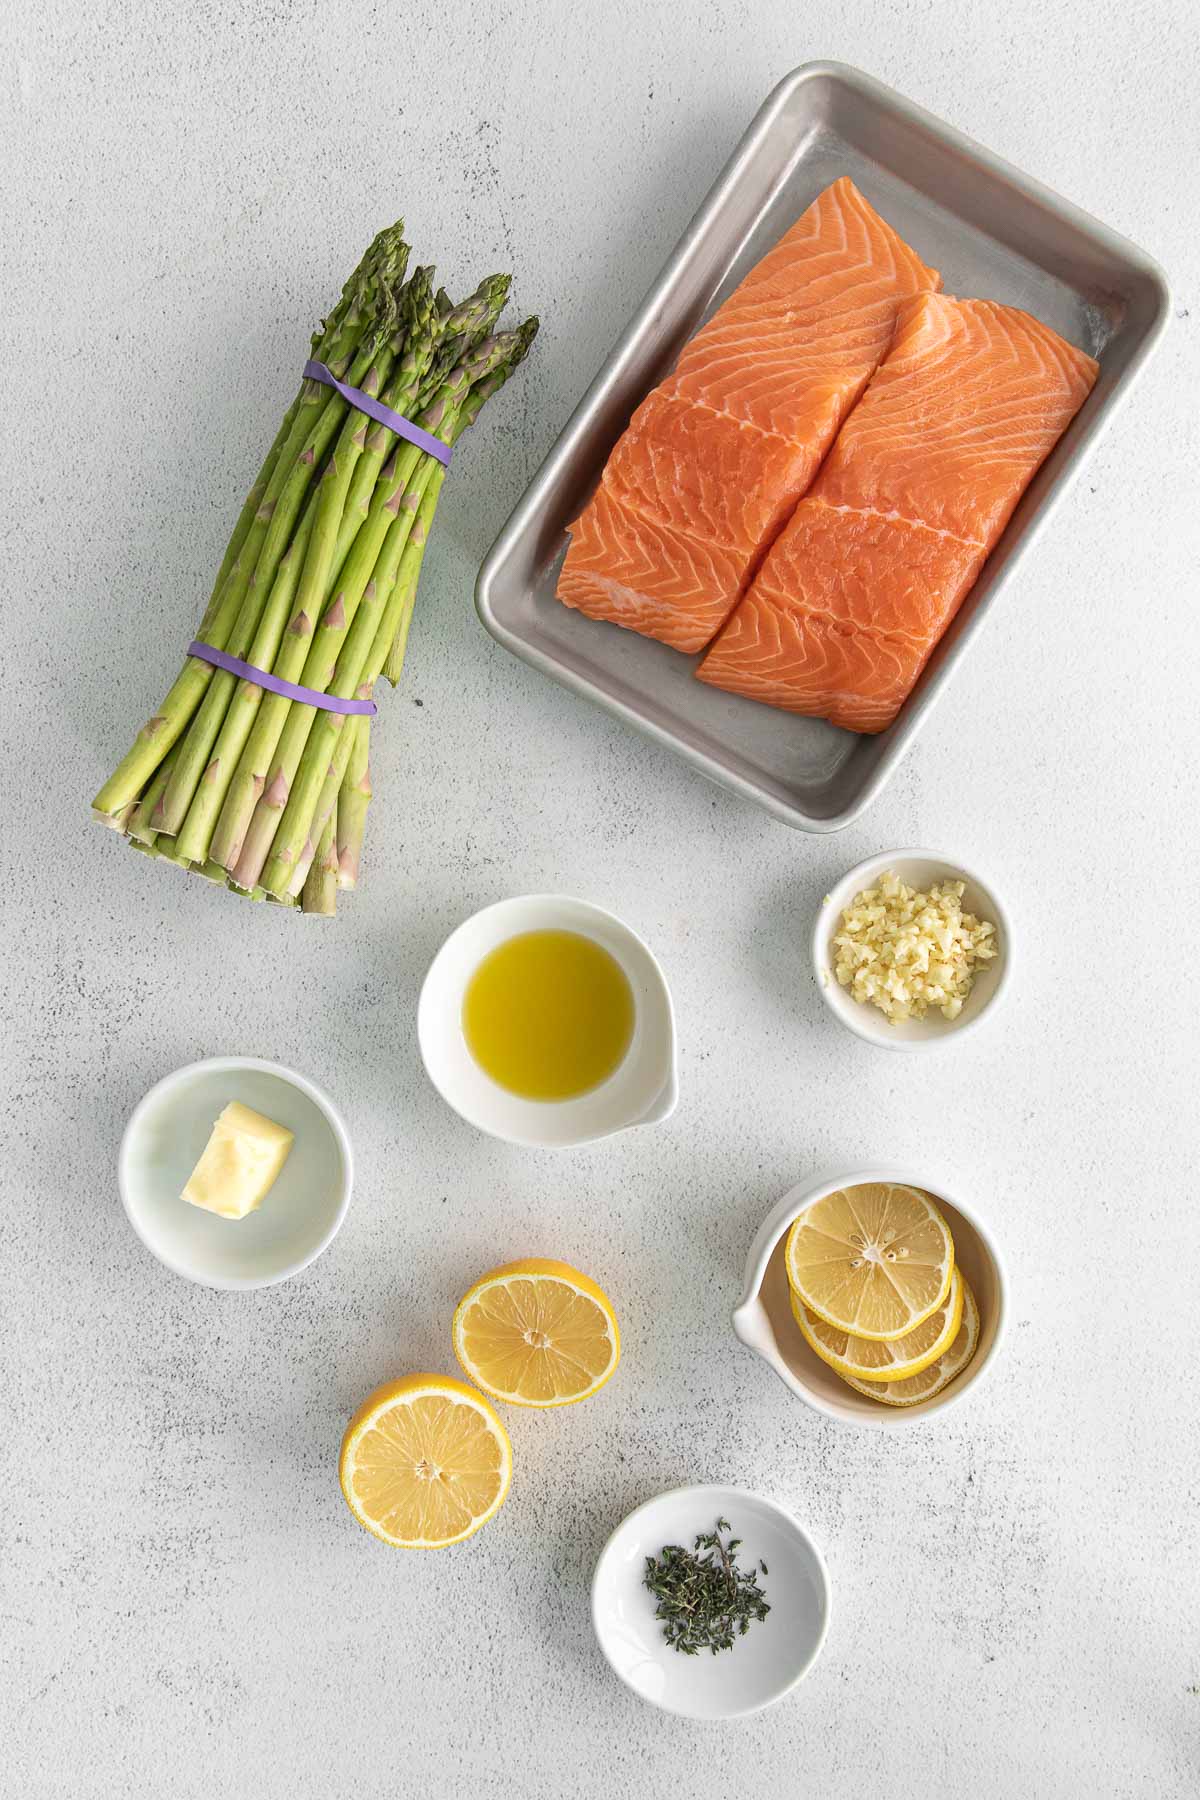 baking sheet with two salmon fillets, one bunch of asparagus, and several small white bowls with lemon, spices